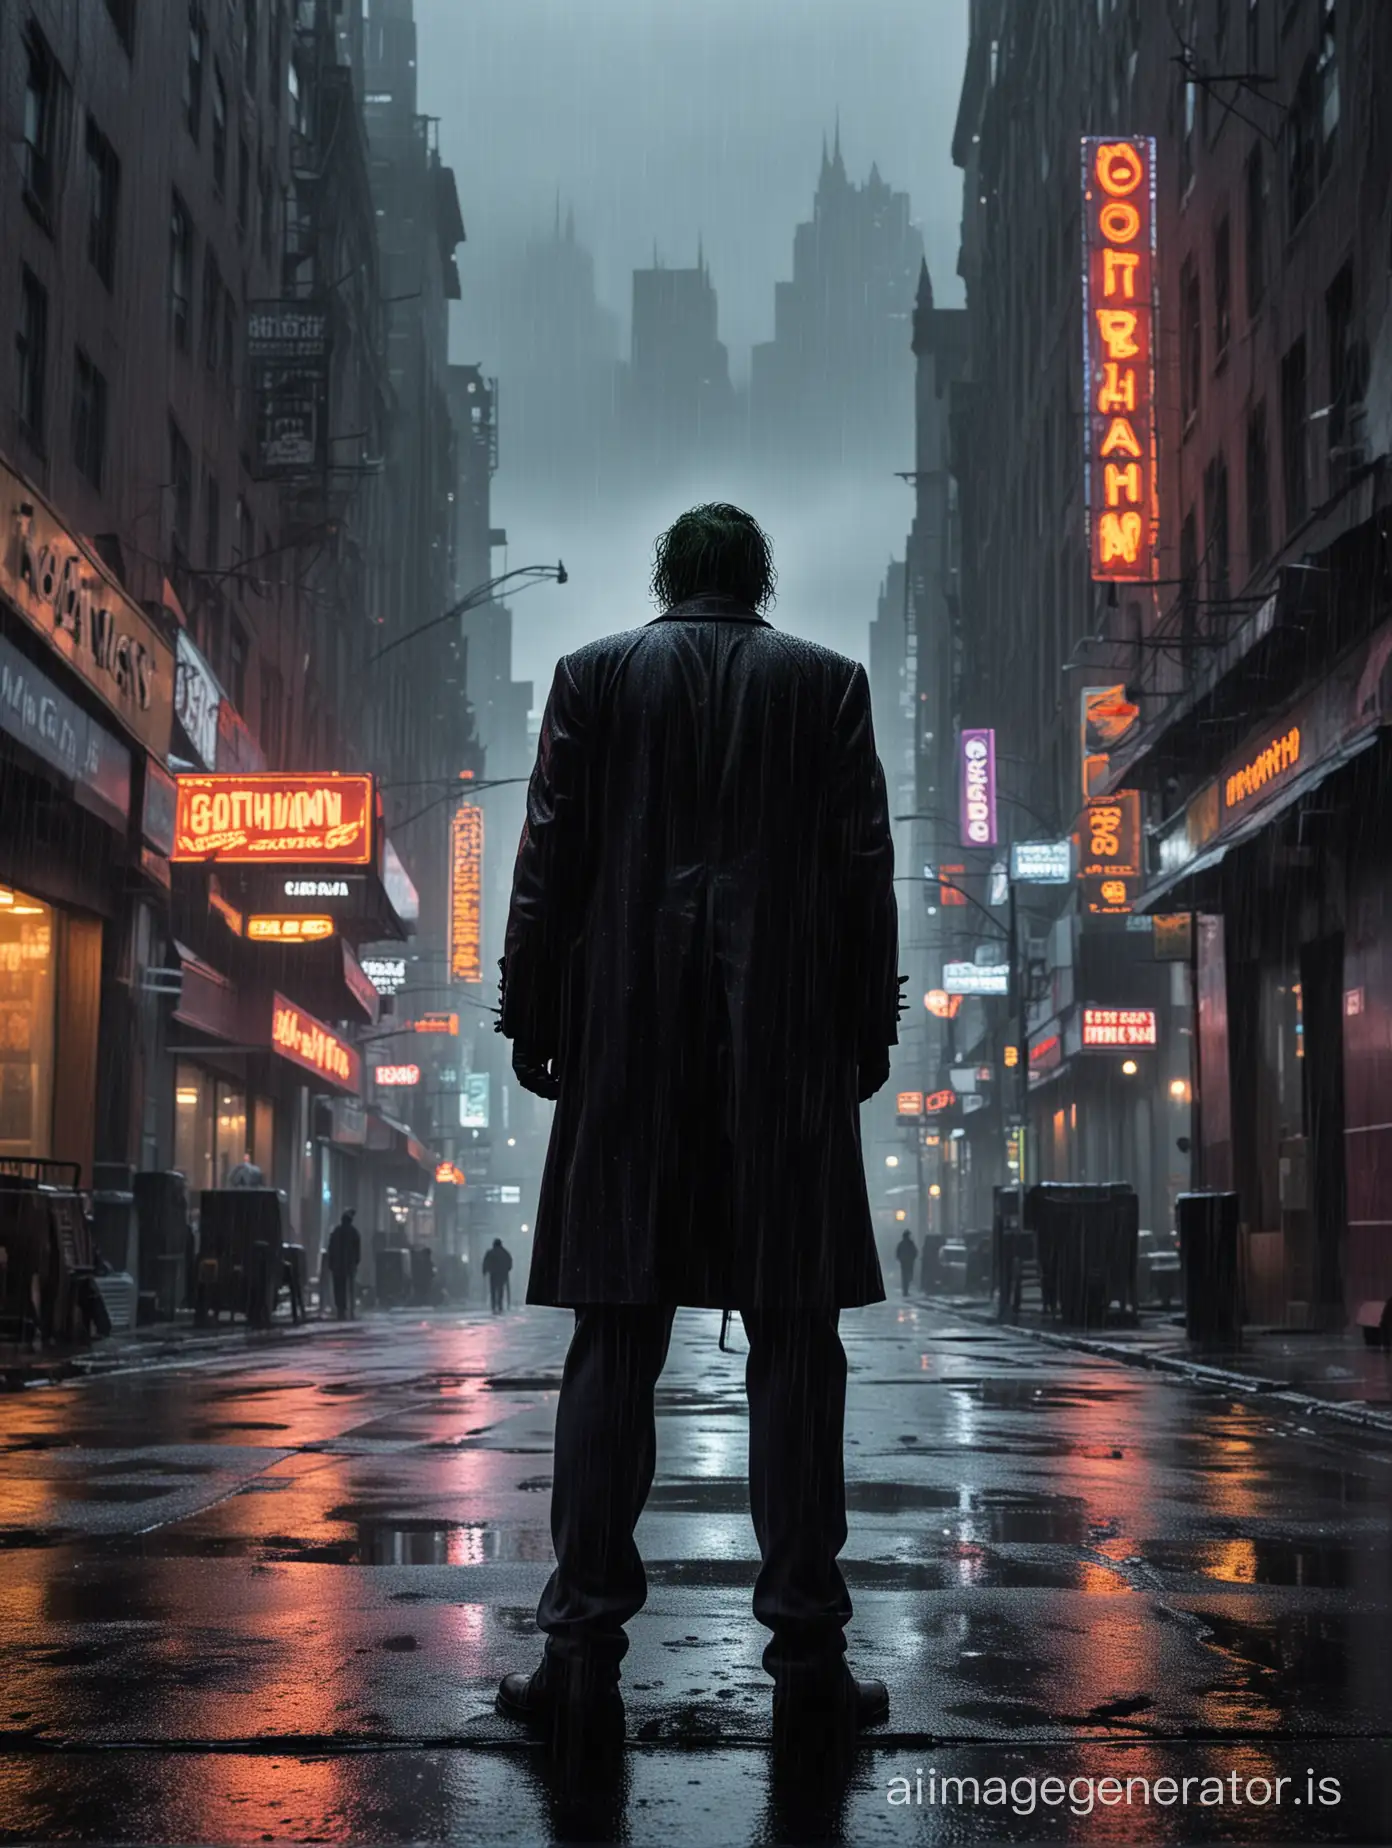 The Joker silhouetted against a rain-slicked Gotham skyline, neon signs casting ominous colors.